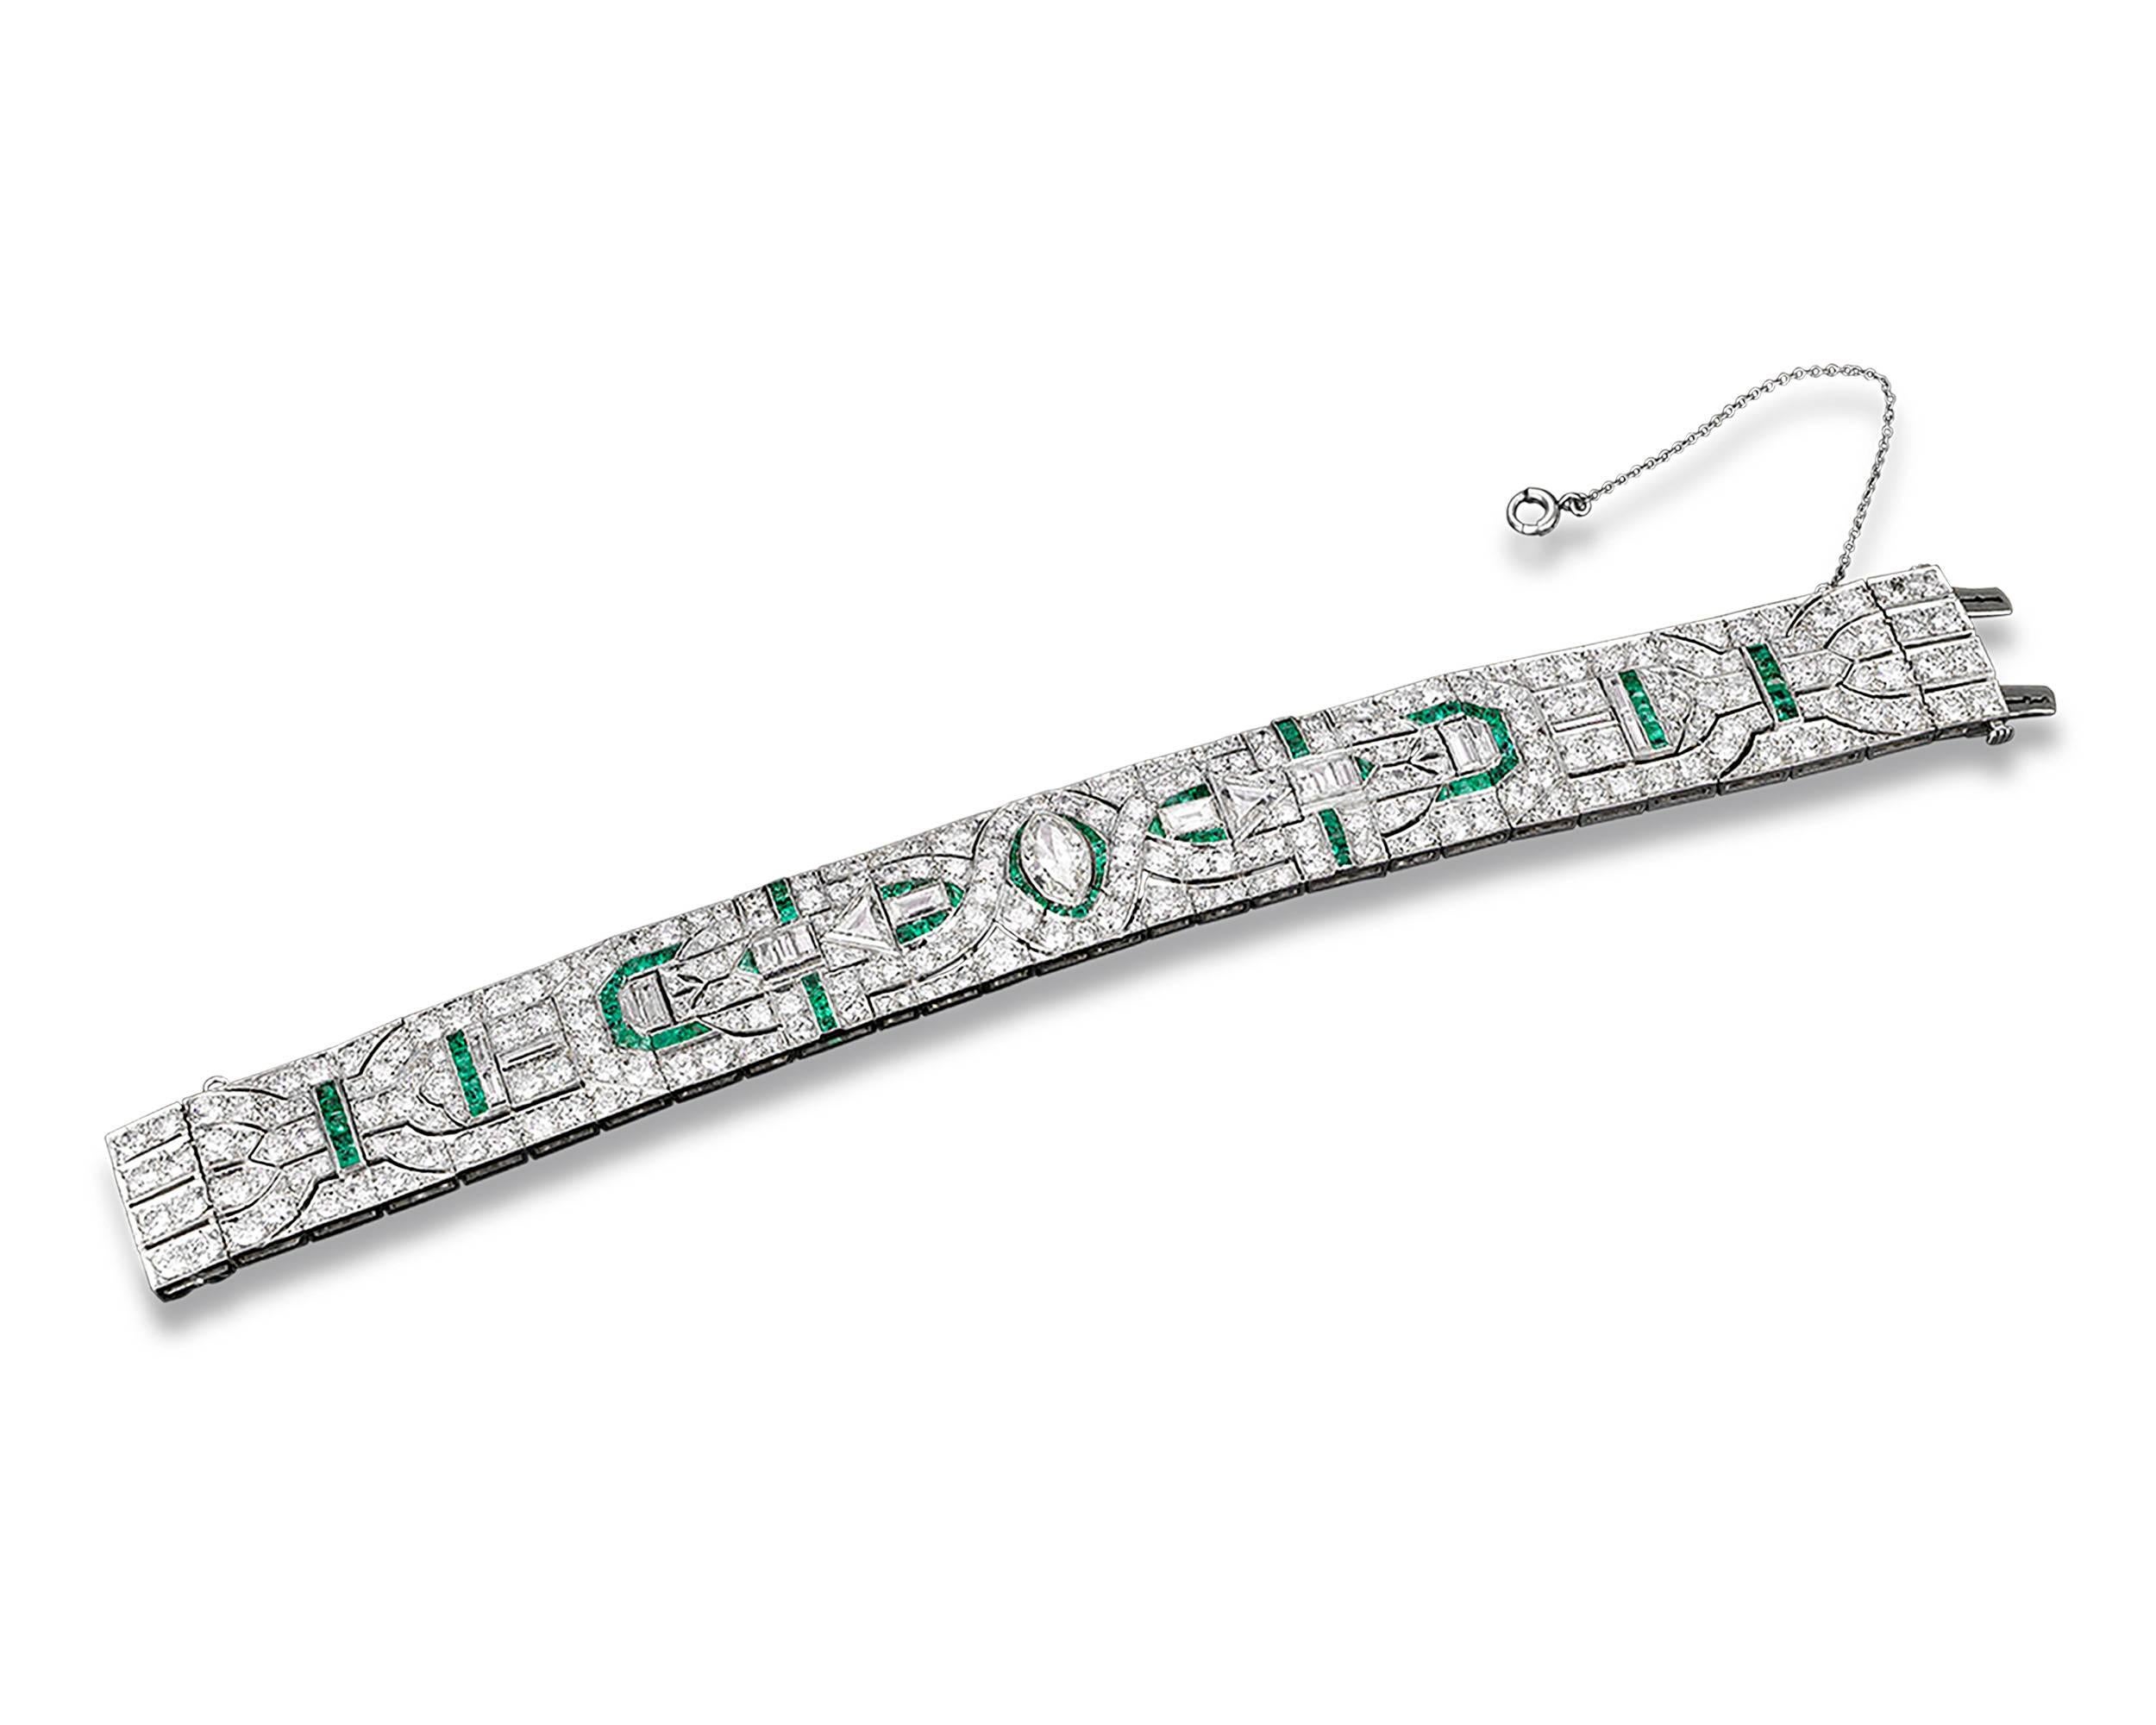 This lovely Art Deco bracelet is set with approximately 21.75 carats of brilliant diamonds. The striking geometric design also incorporates approximately .75 carats of emeralds, whose verdant beautifully complements the diamonds’ sparkle. Crafted of